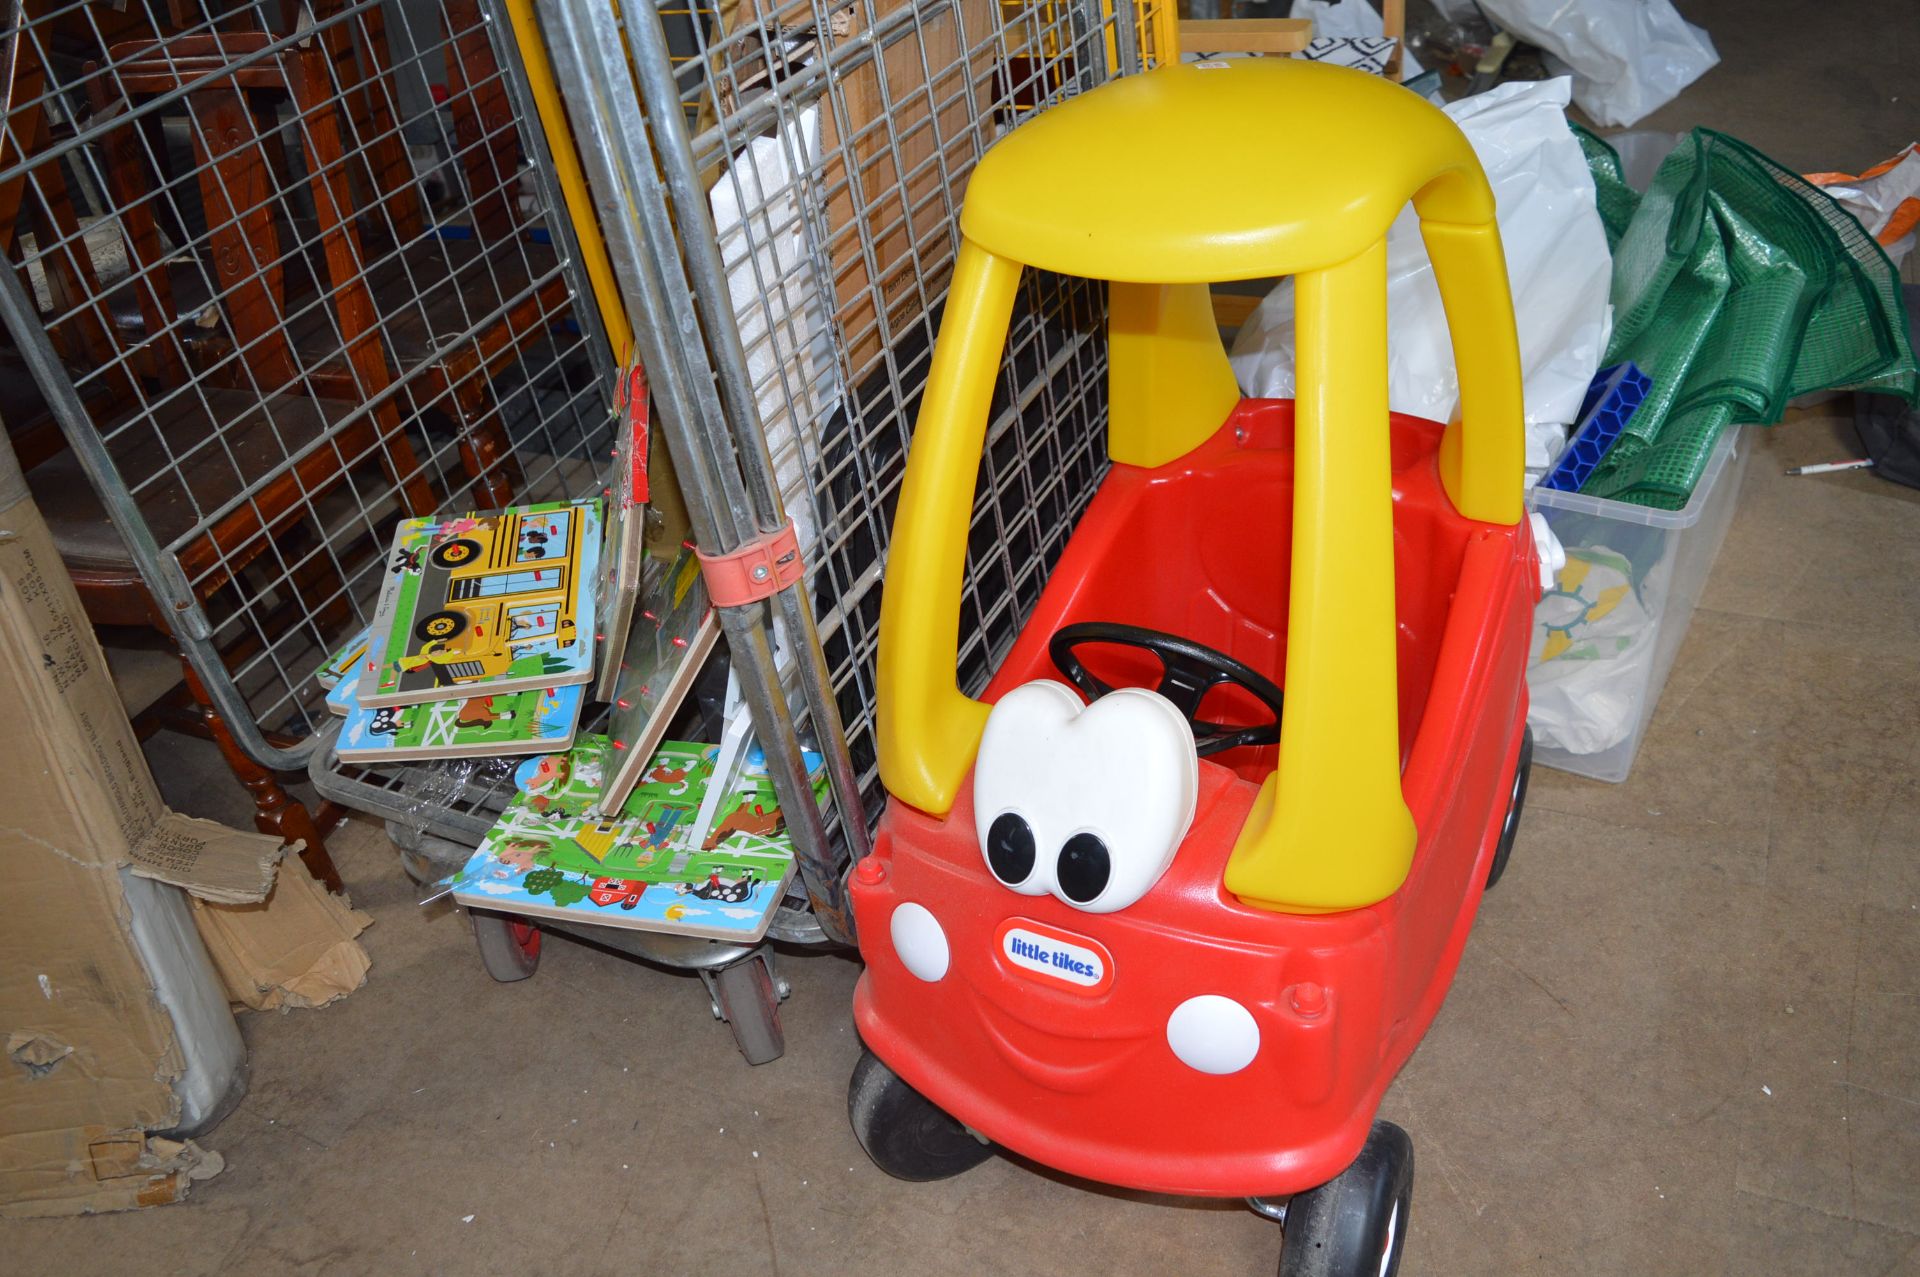 Little Tikes Buggy, Plug-In Pictures Books, and Jigsaw Puzzles